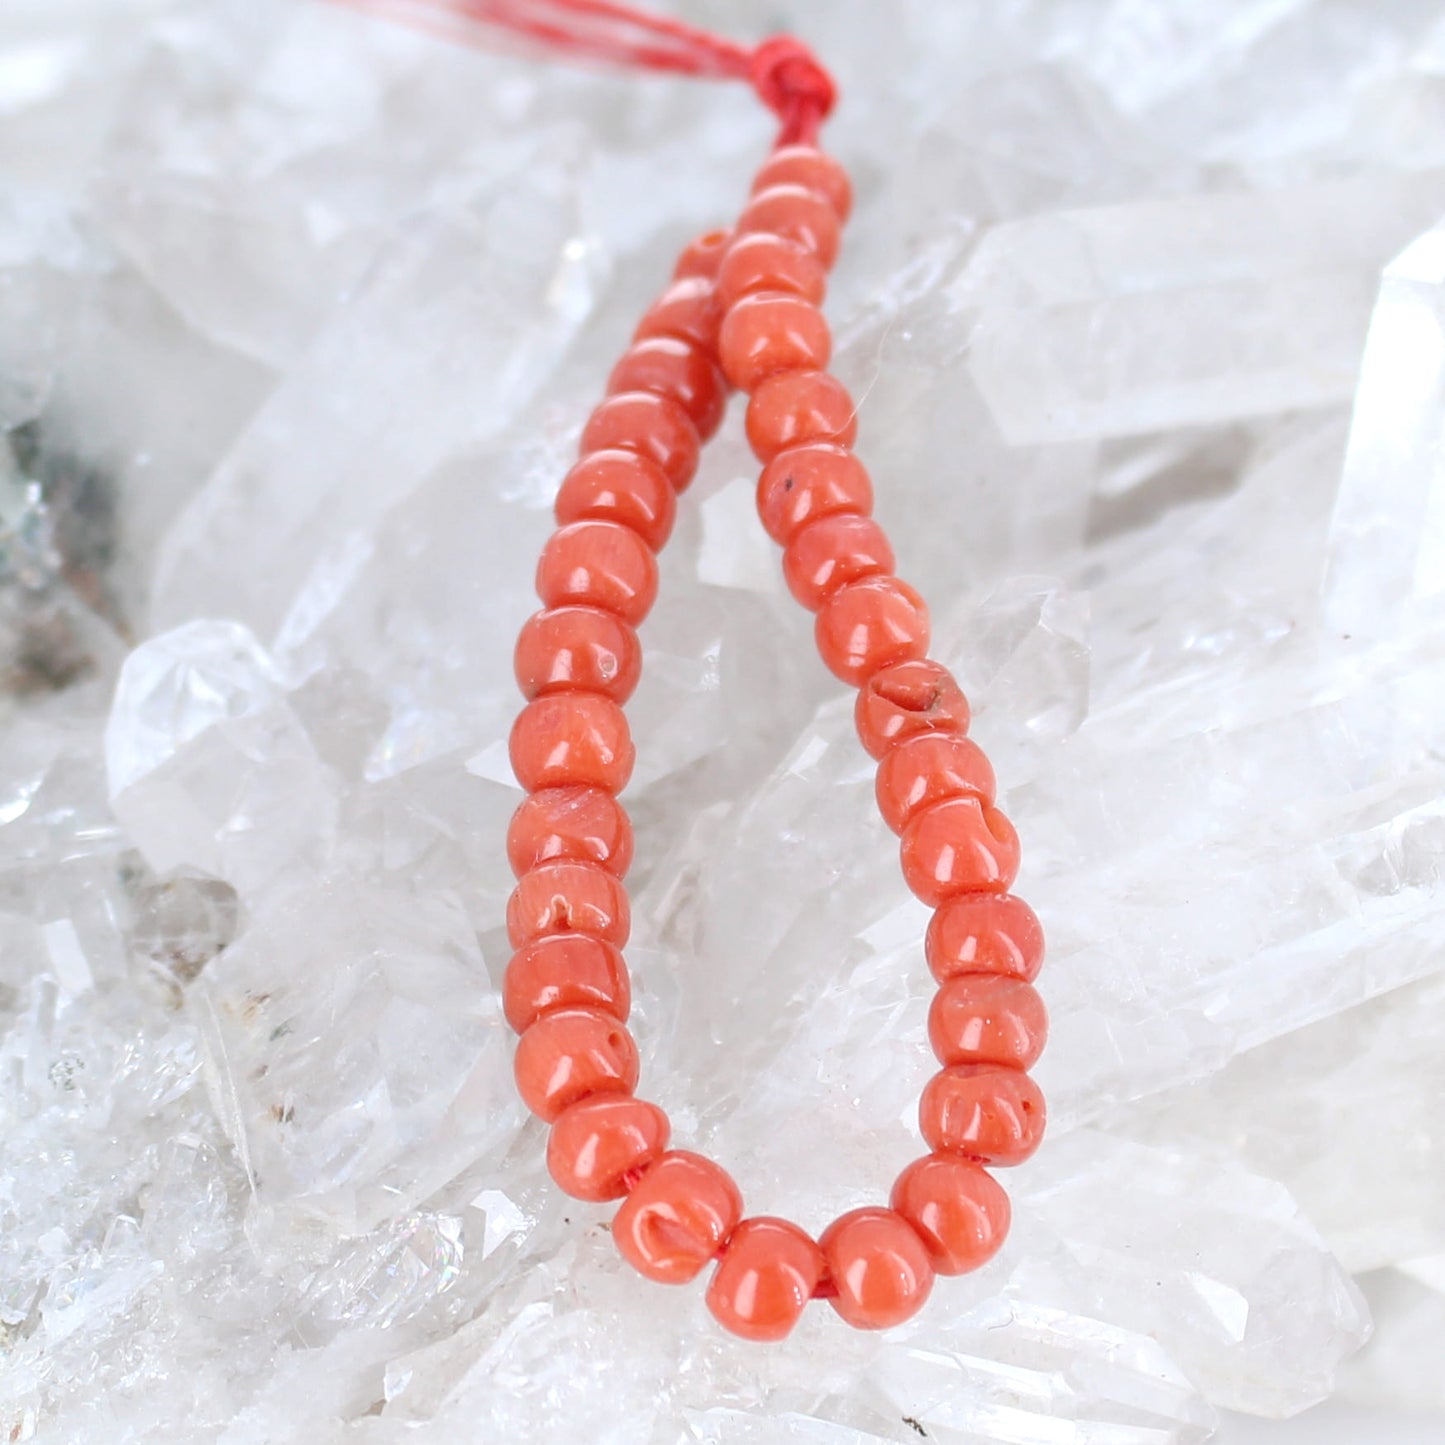 Bright Tomato Red Italian Coral Beads Pueblo Shaped 5.5mm 3.75"